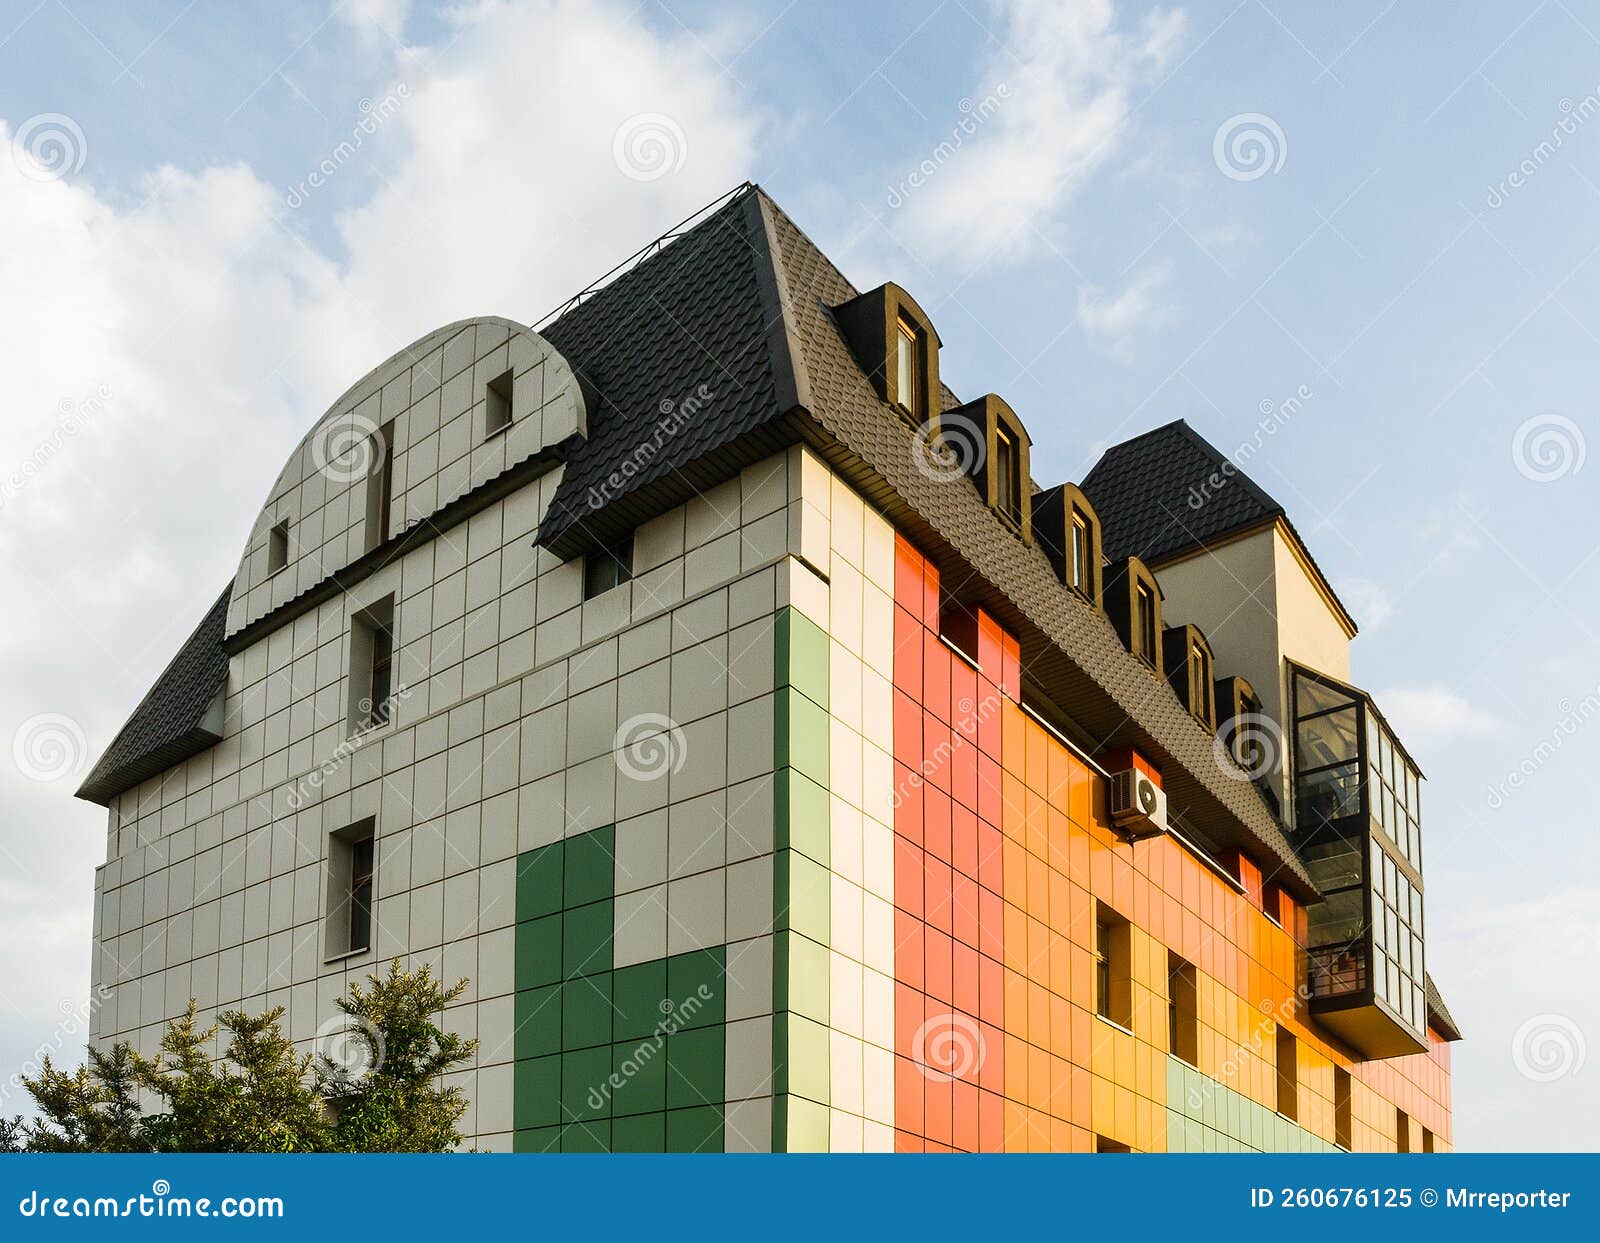 creative colorful exterior of the commercial lowrise townhouse building architecture with a ventilate facade and loft mansard roof